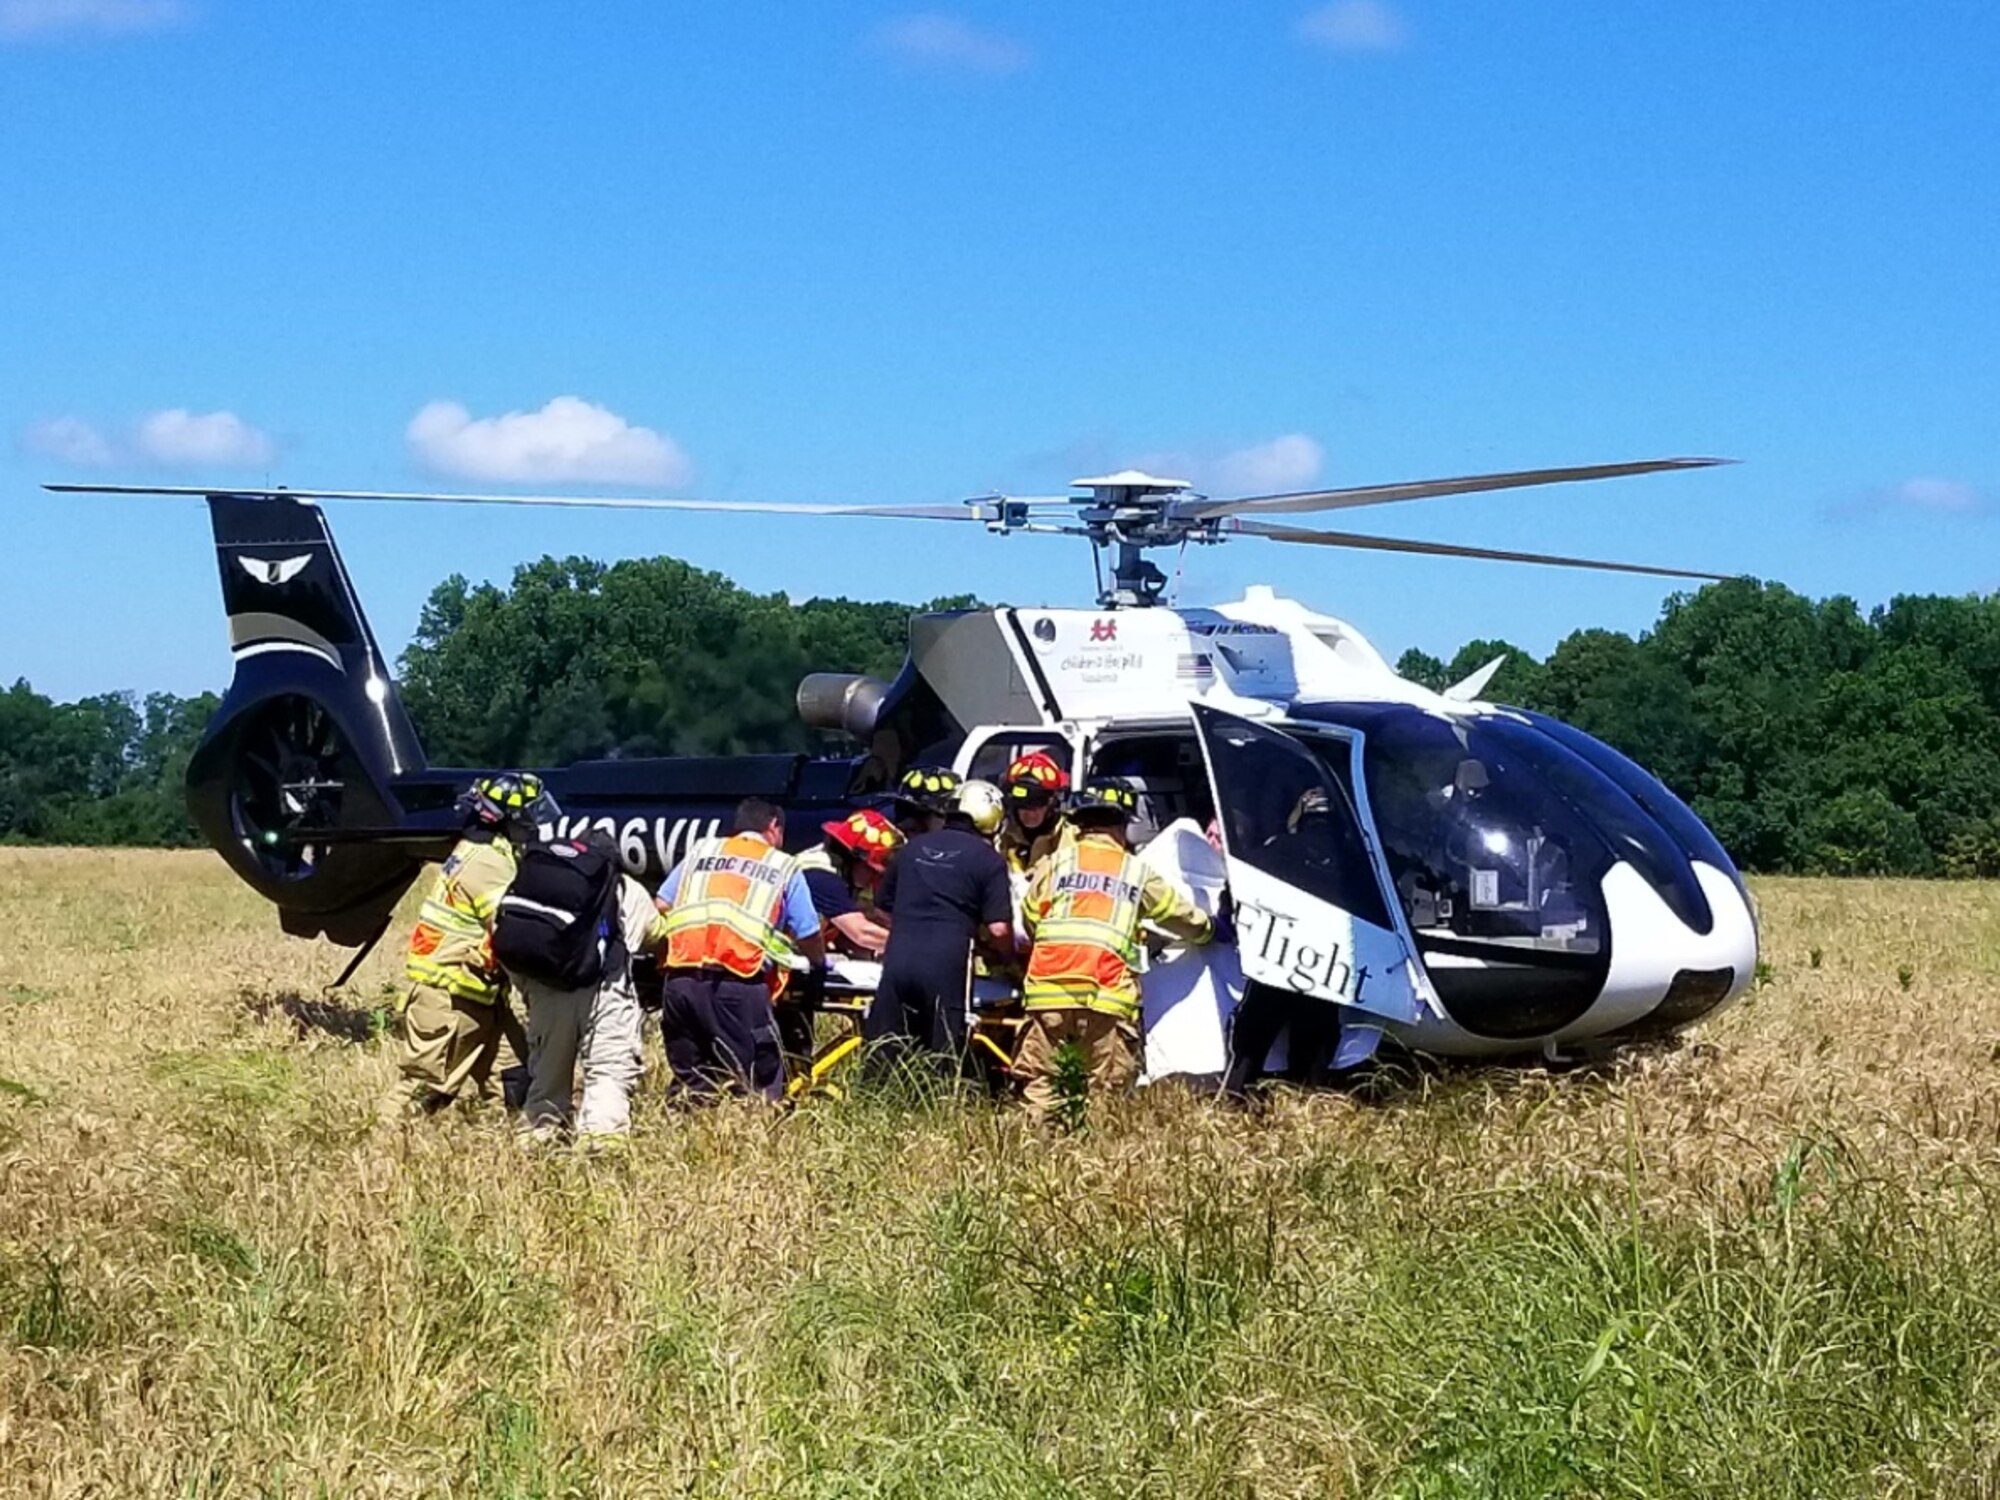 Arnold Air Force Base paramedics and firefighters load a patient into a Vanderbilt LifeFlight helicopter following a motor vehicle accident near the Morris Ferry dock. The base fire department is trained to work with local aeromedical evacuation teams whenever serious injury or illness requires rapid transport to a local hospital or certified trauma center. (Courtesy photo)